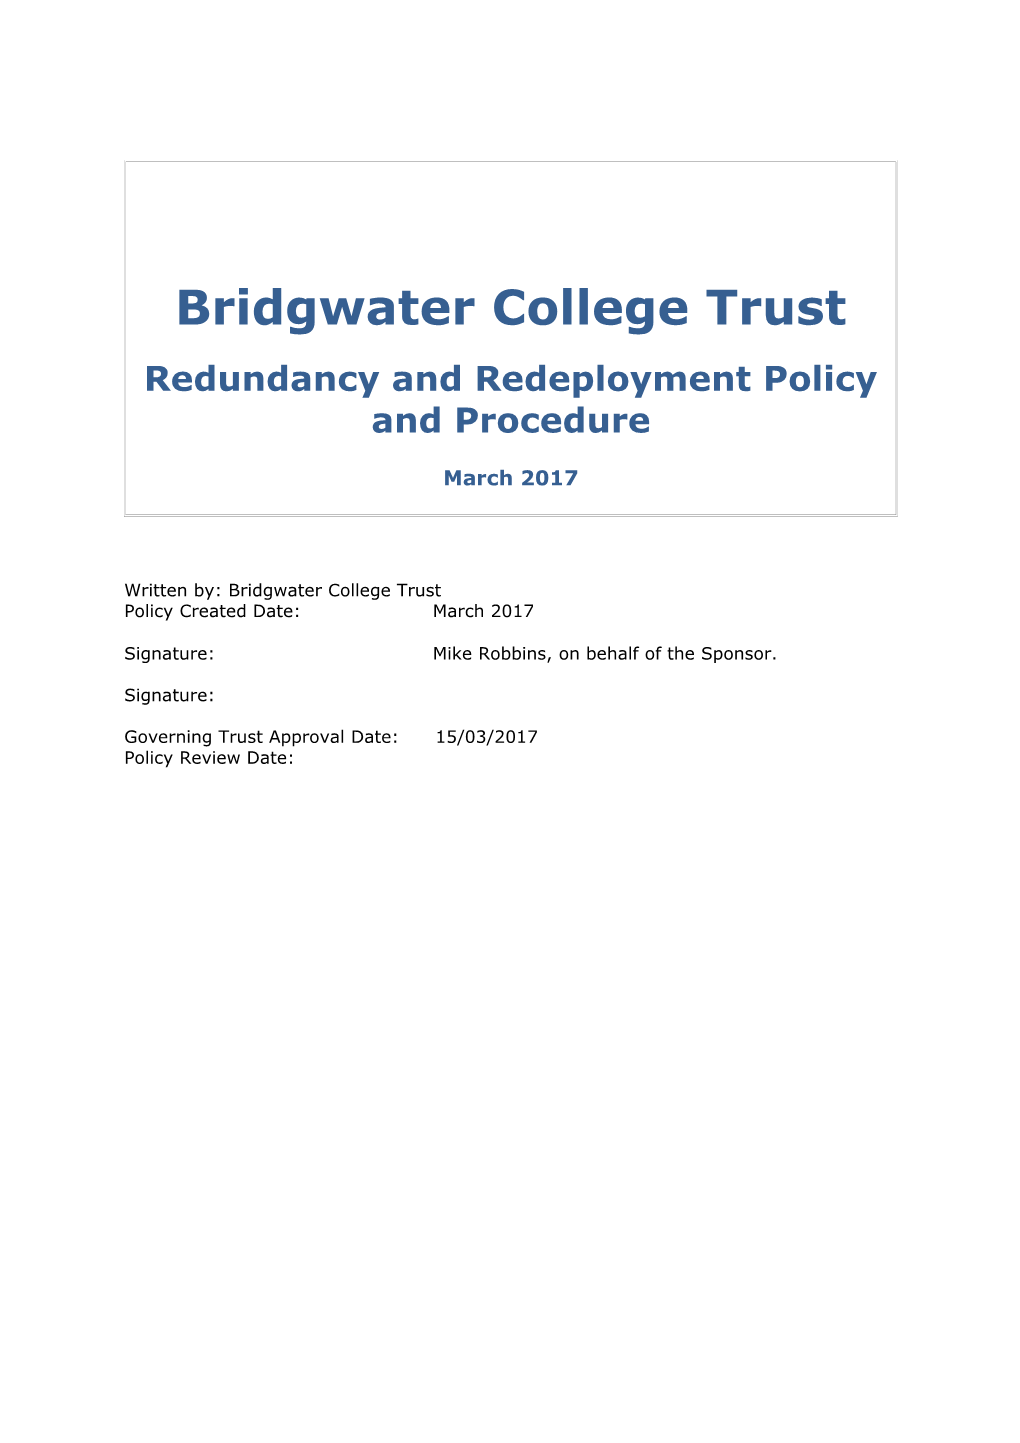 Redundancy and Redeployment Policy and Procedure